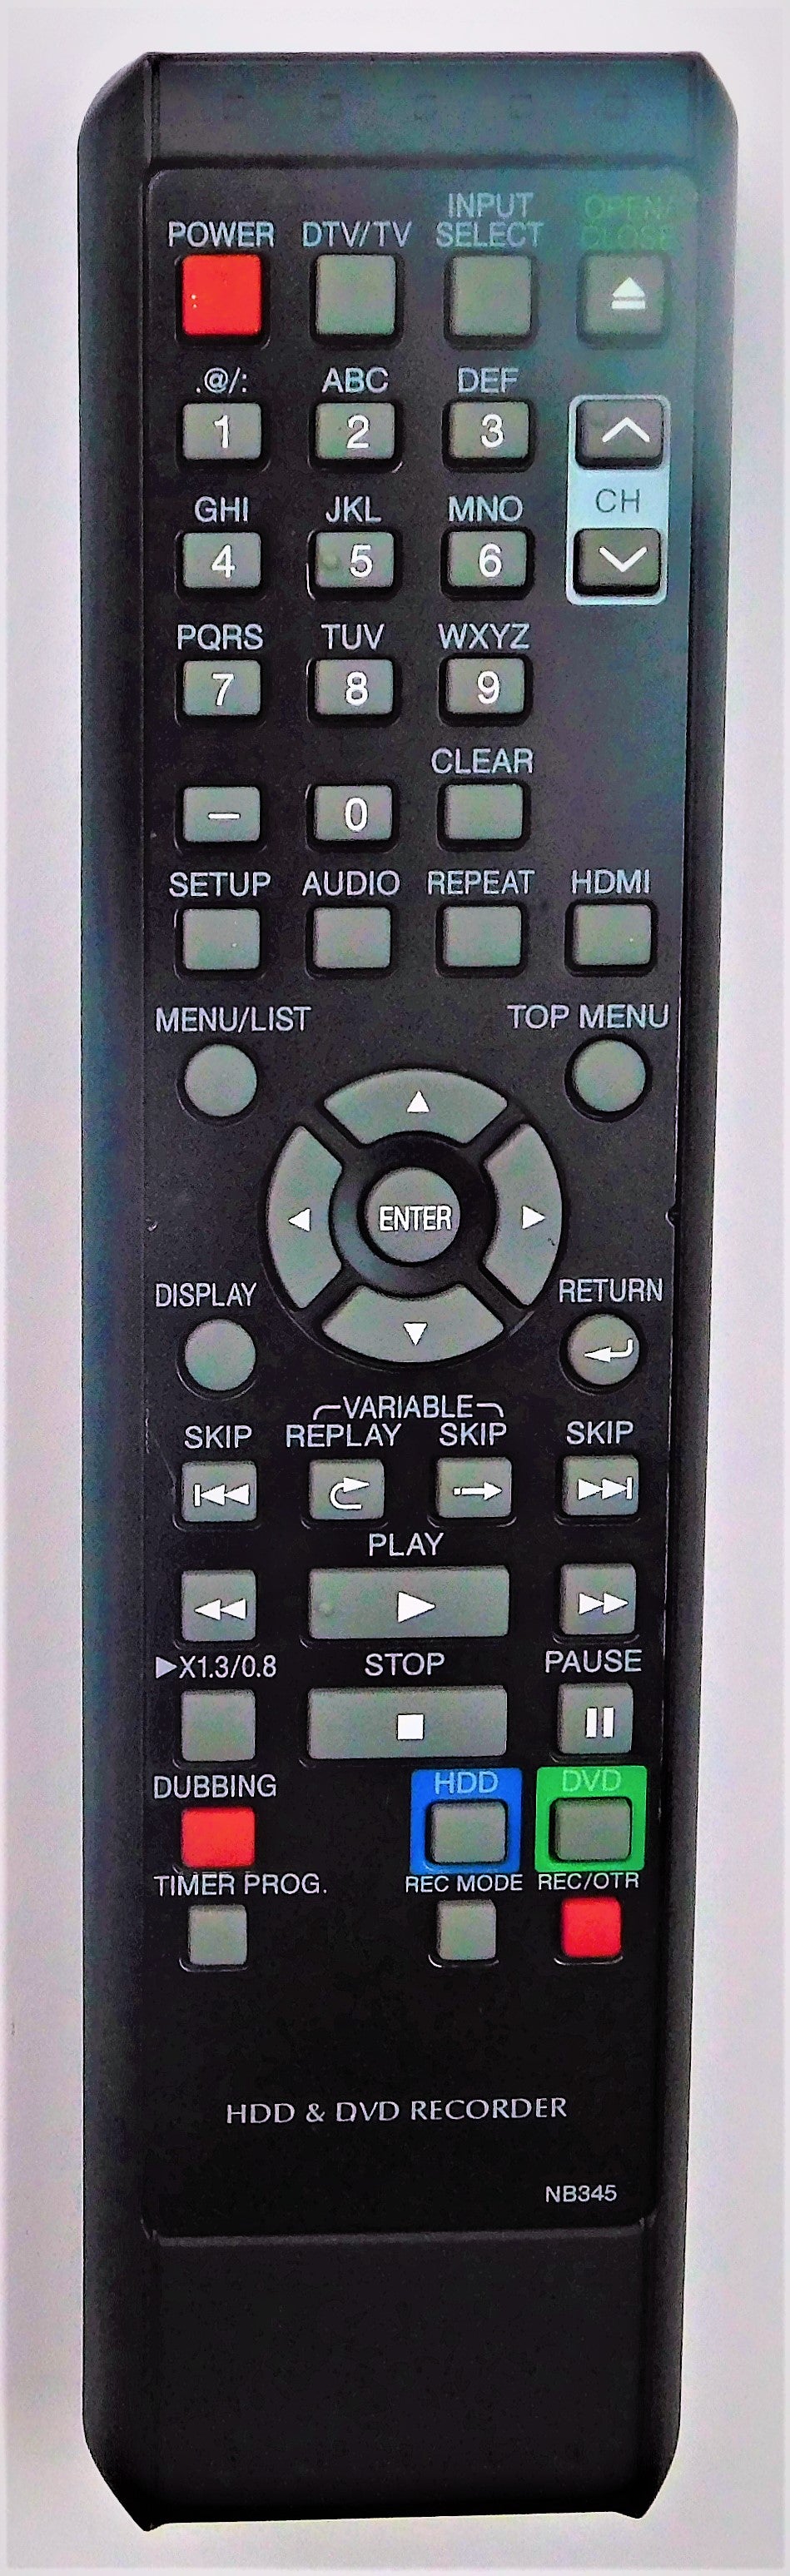 OEM replacement remote control for Sylvania HDD & DVD Recorders NB345UD